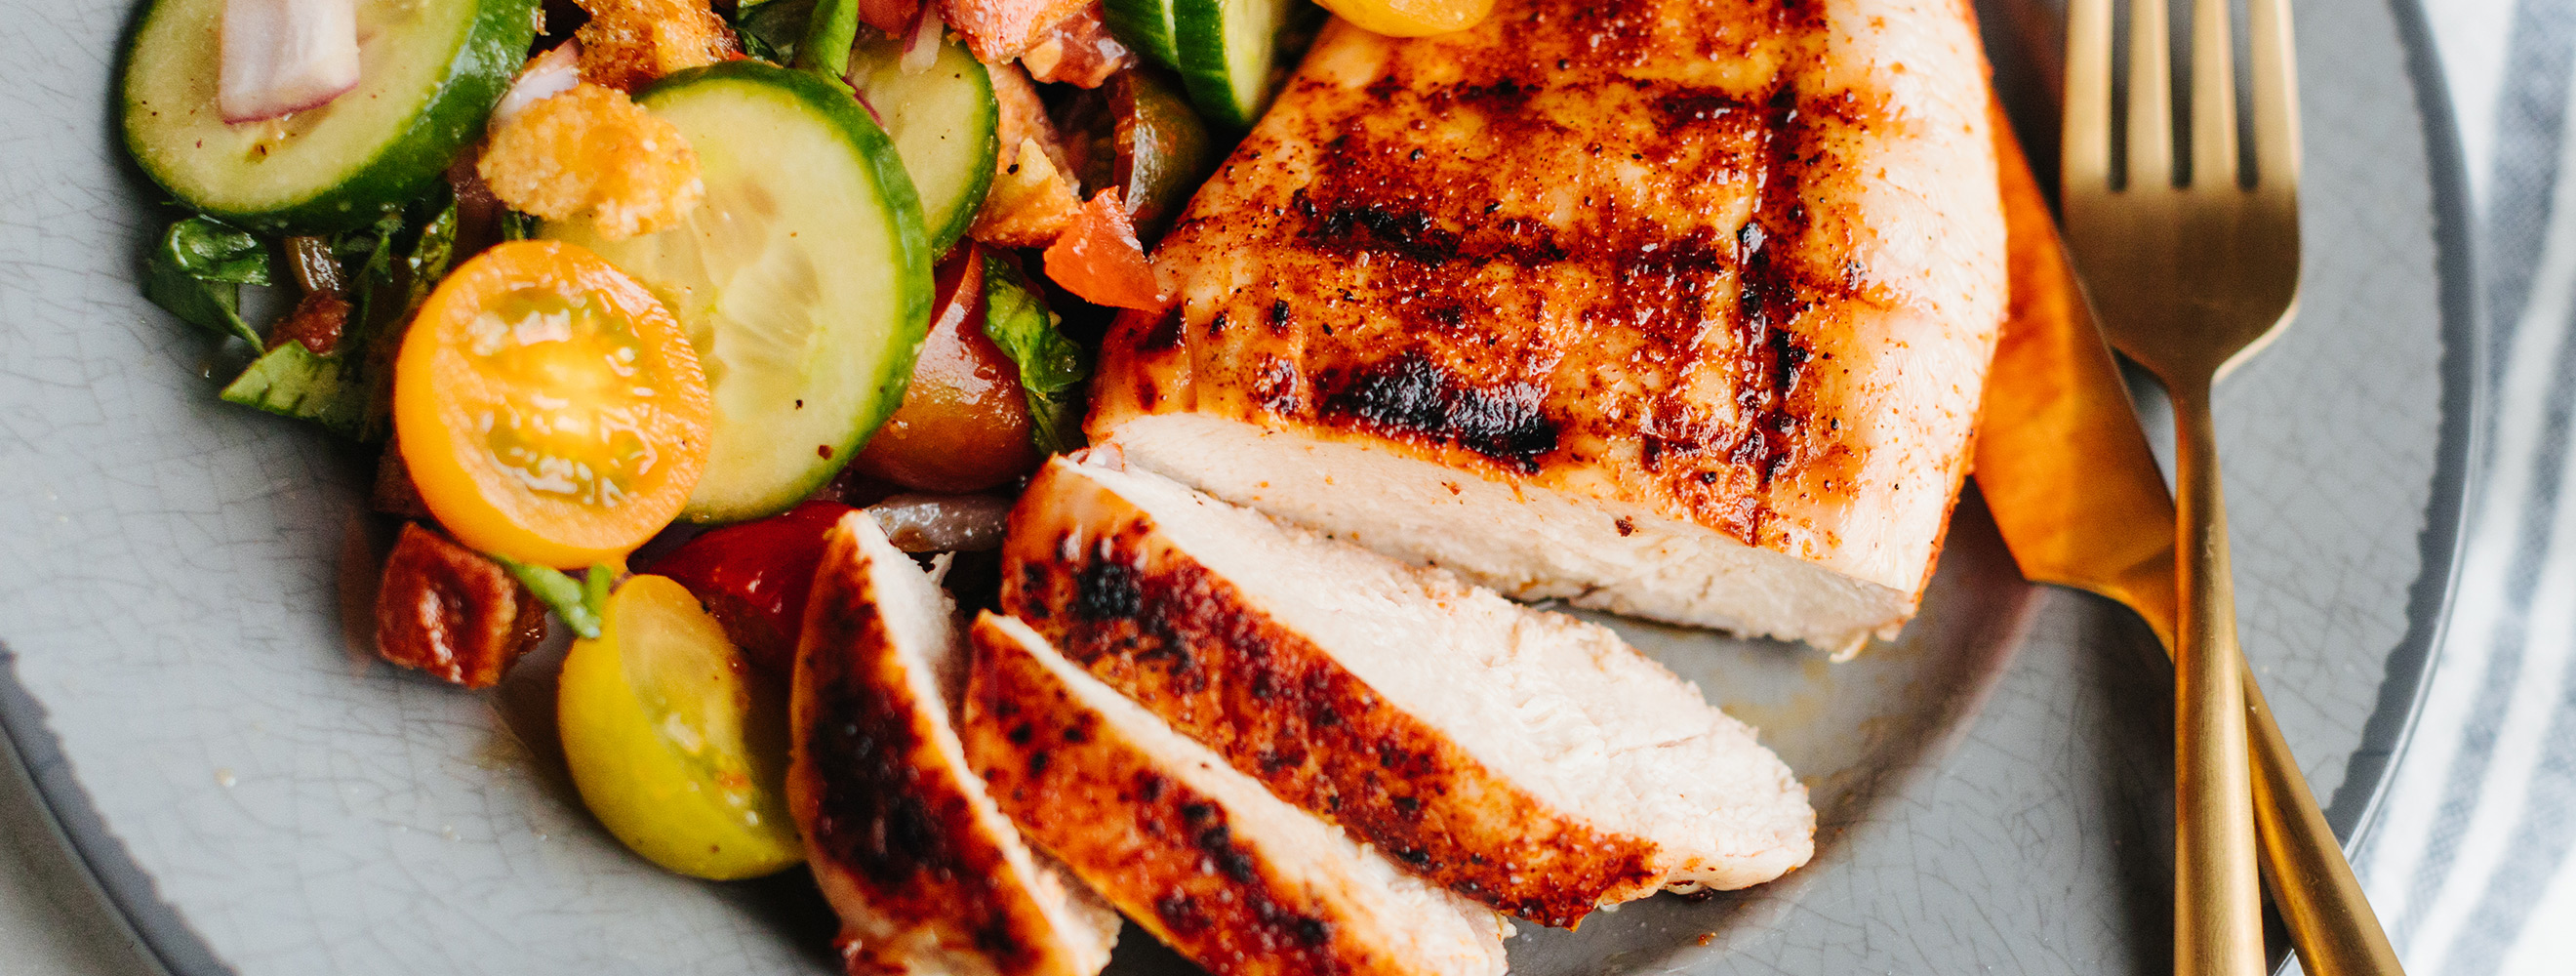 grilled chicken breast sliced on a plate with fresh vegetables